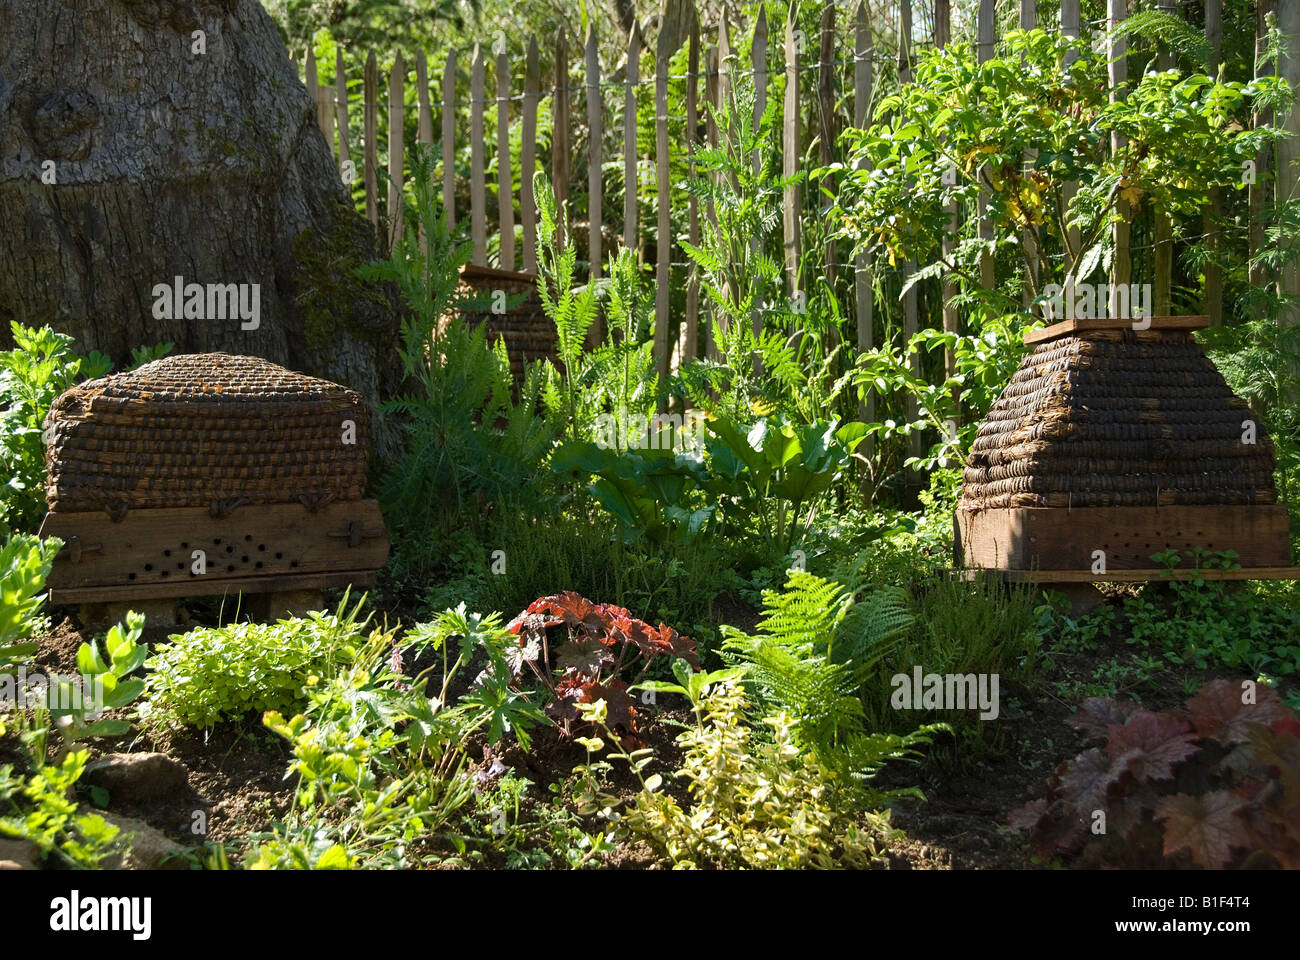 Stock photo of old style woven beehives in the village of Montrol Senard Stock Photo